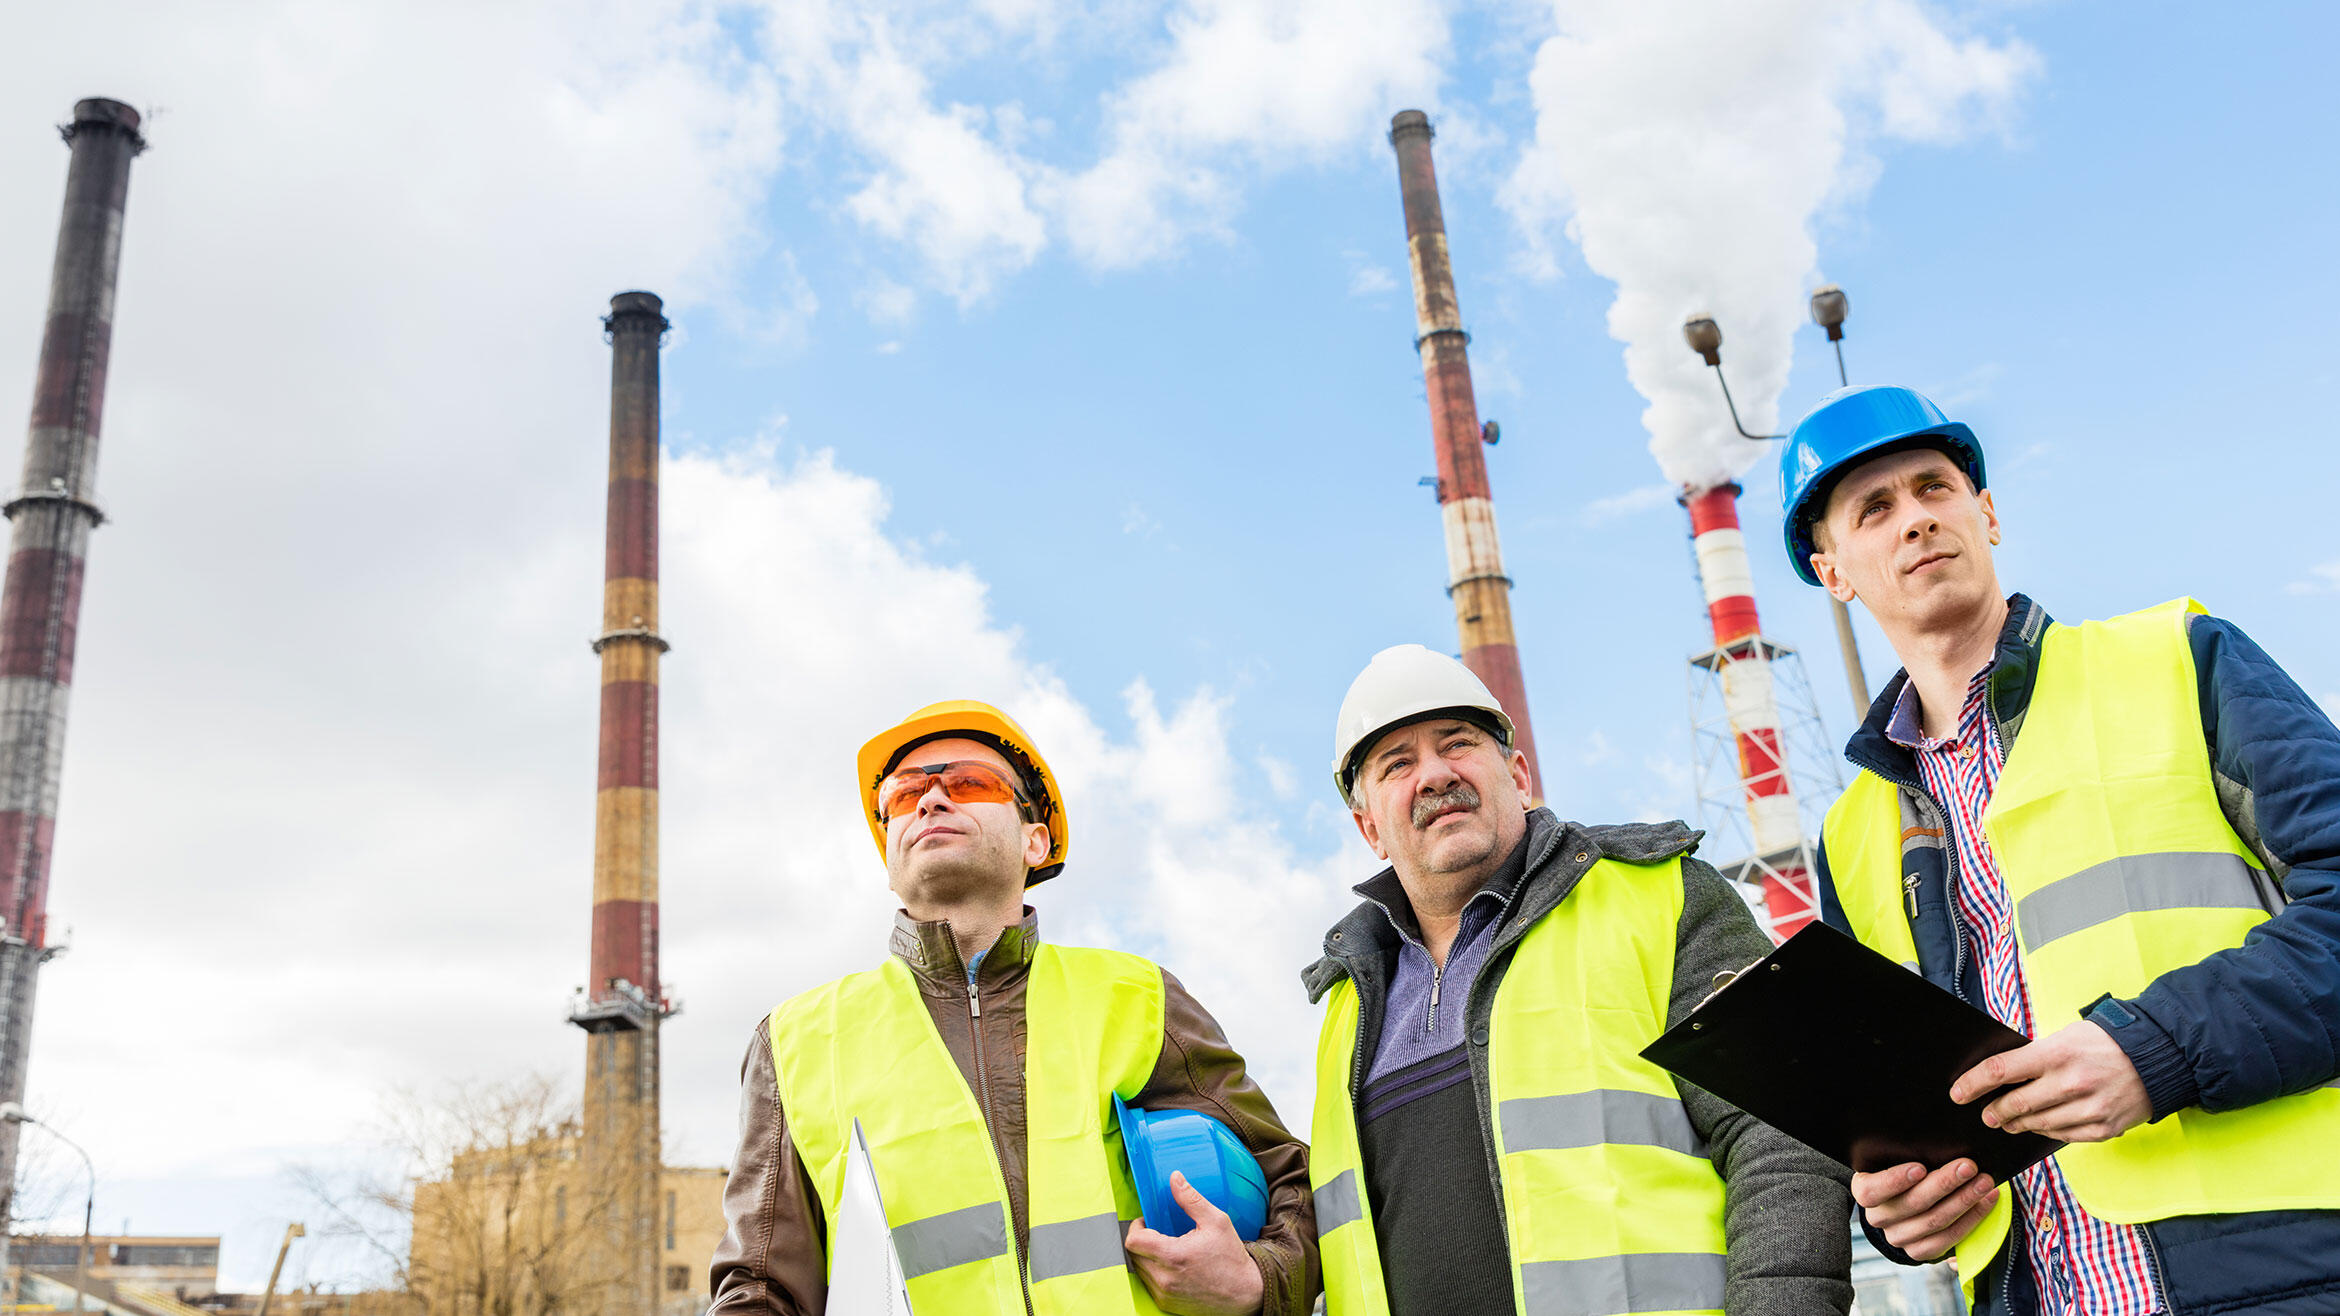 three men with safety vests and protective helmets stand in front of four chimneys